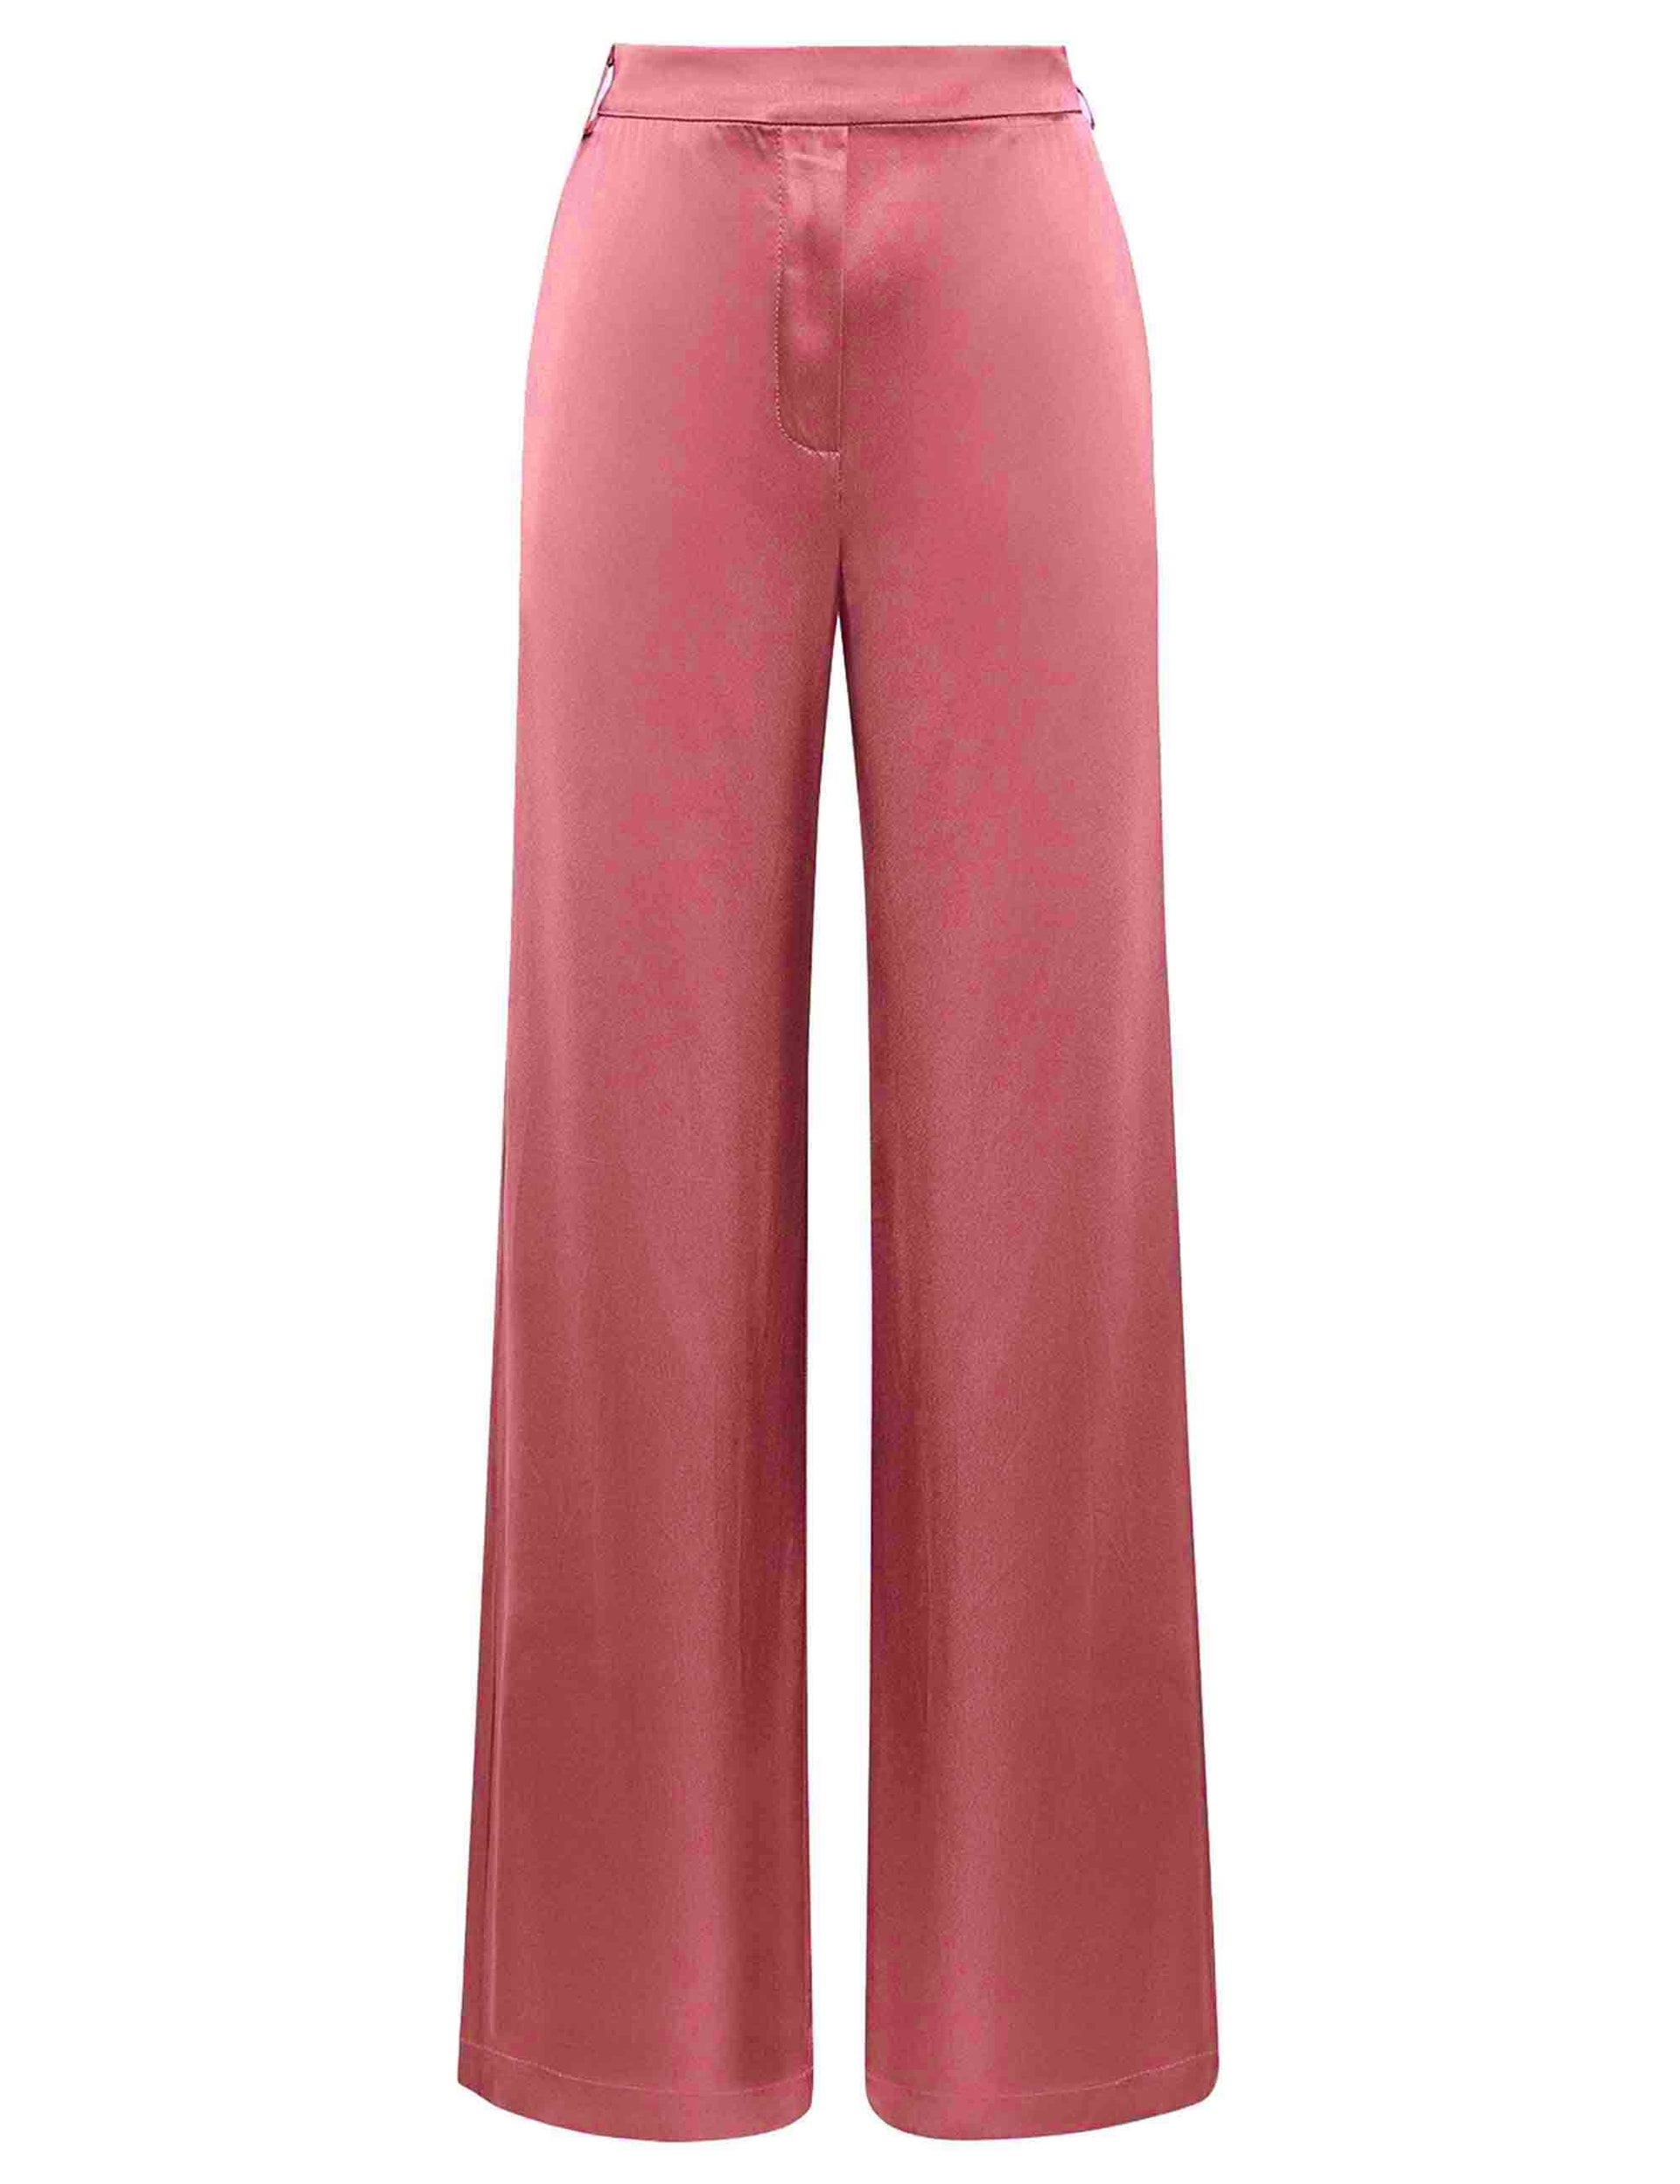 Shiny women's wide-leg trousers in red cady